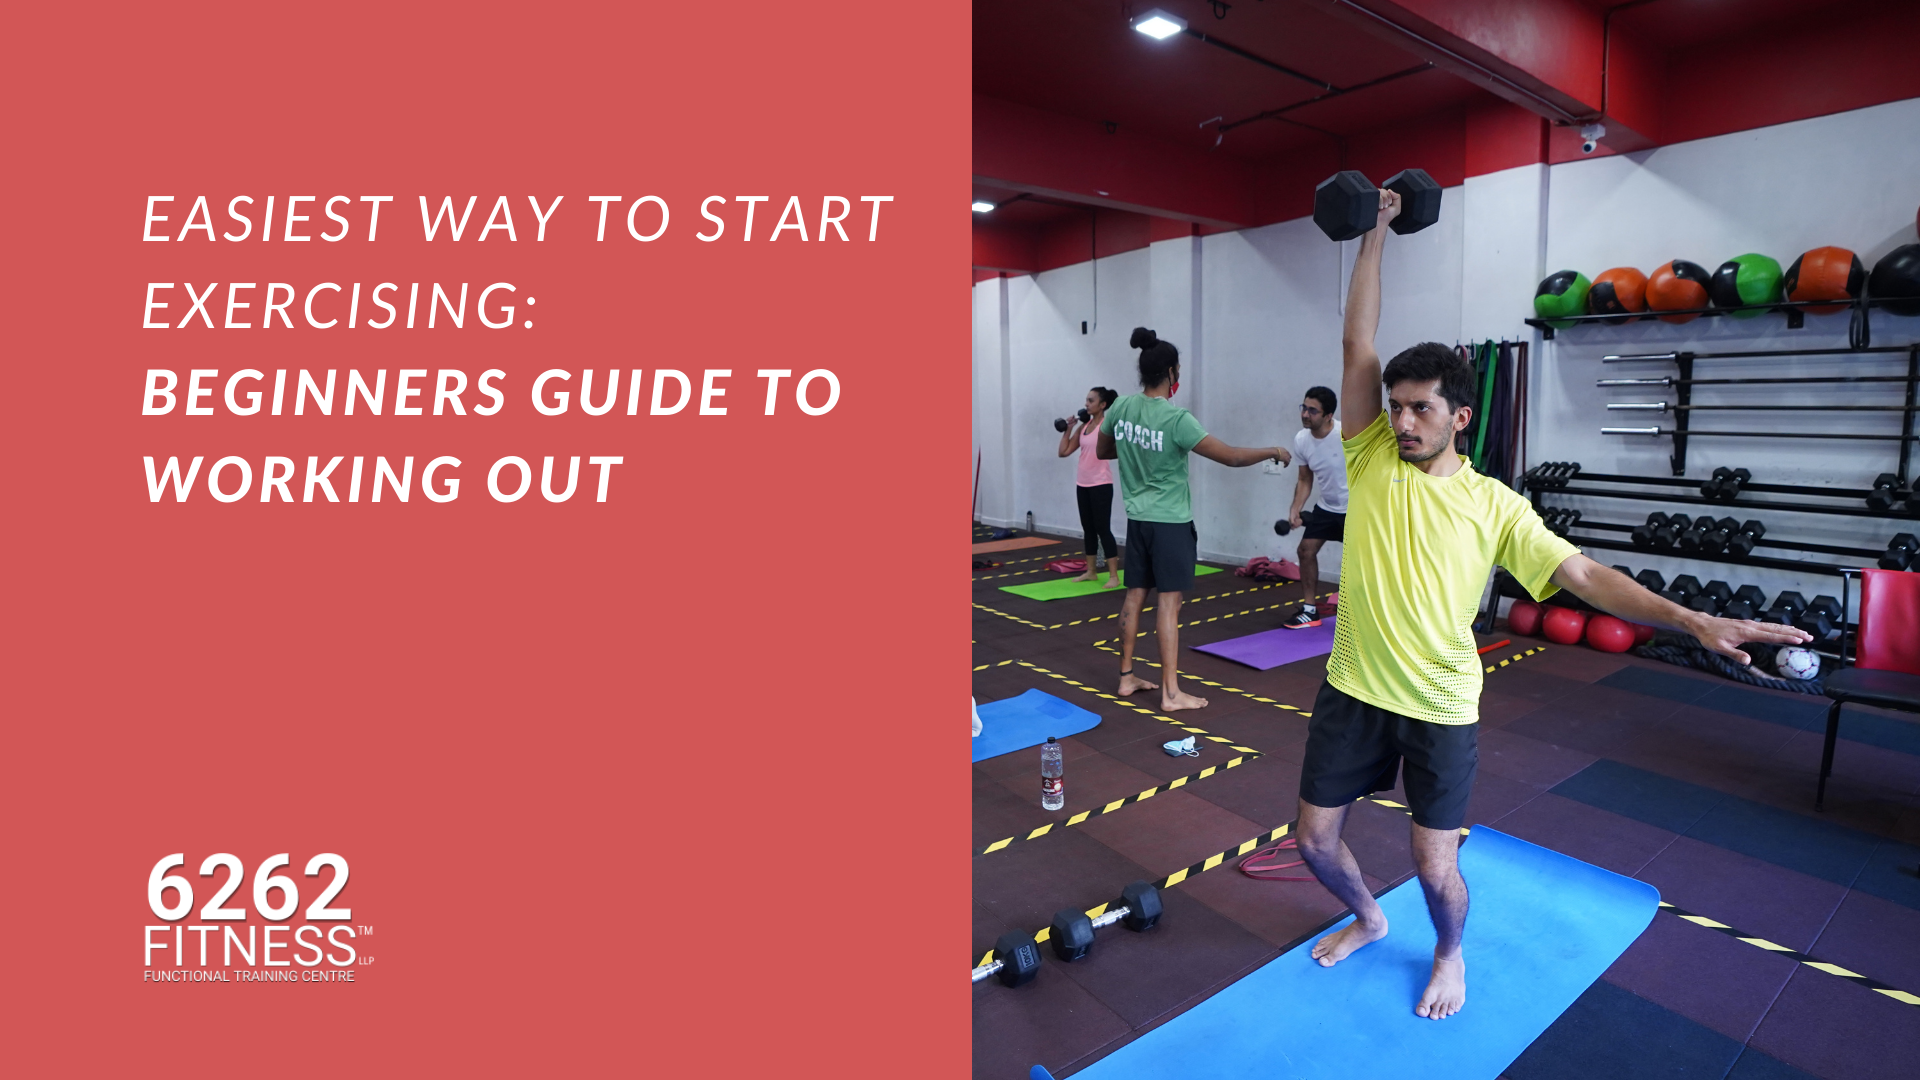 How to start exercising: Beginners Guide to working out